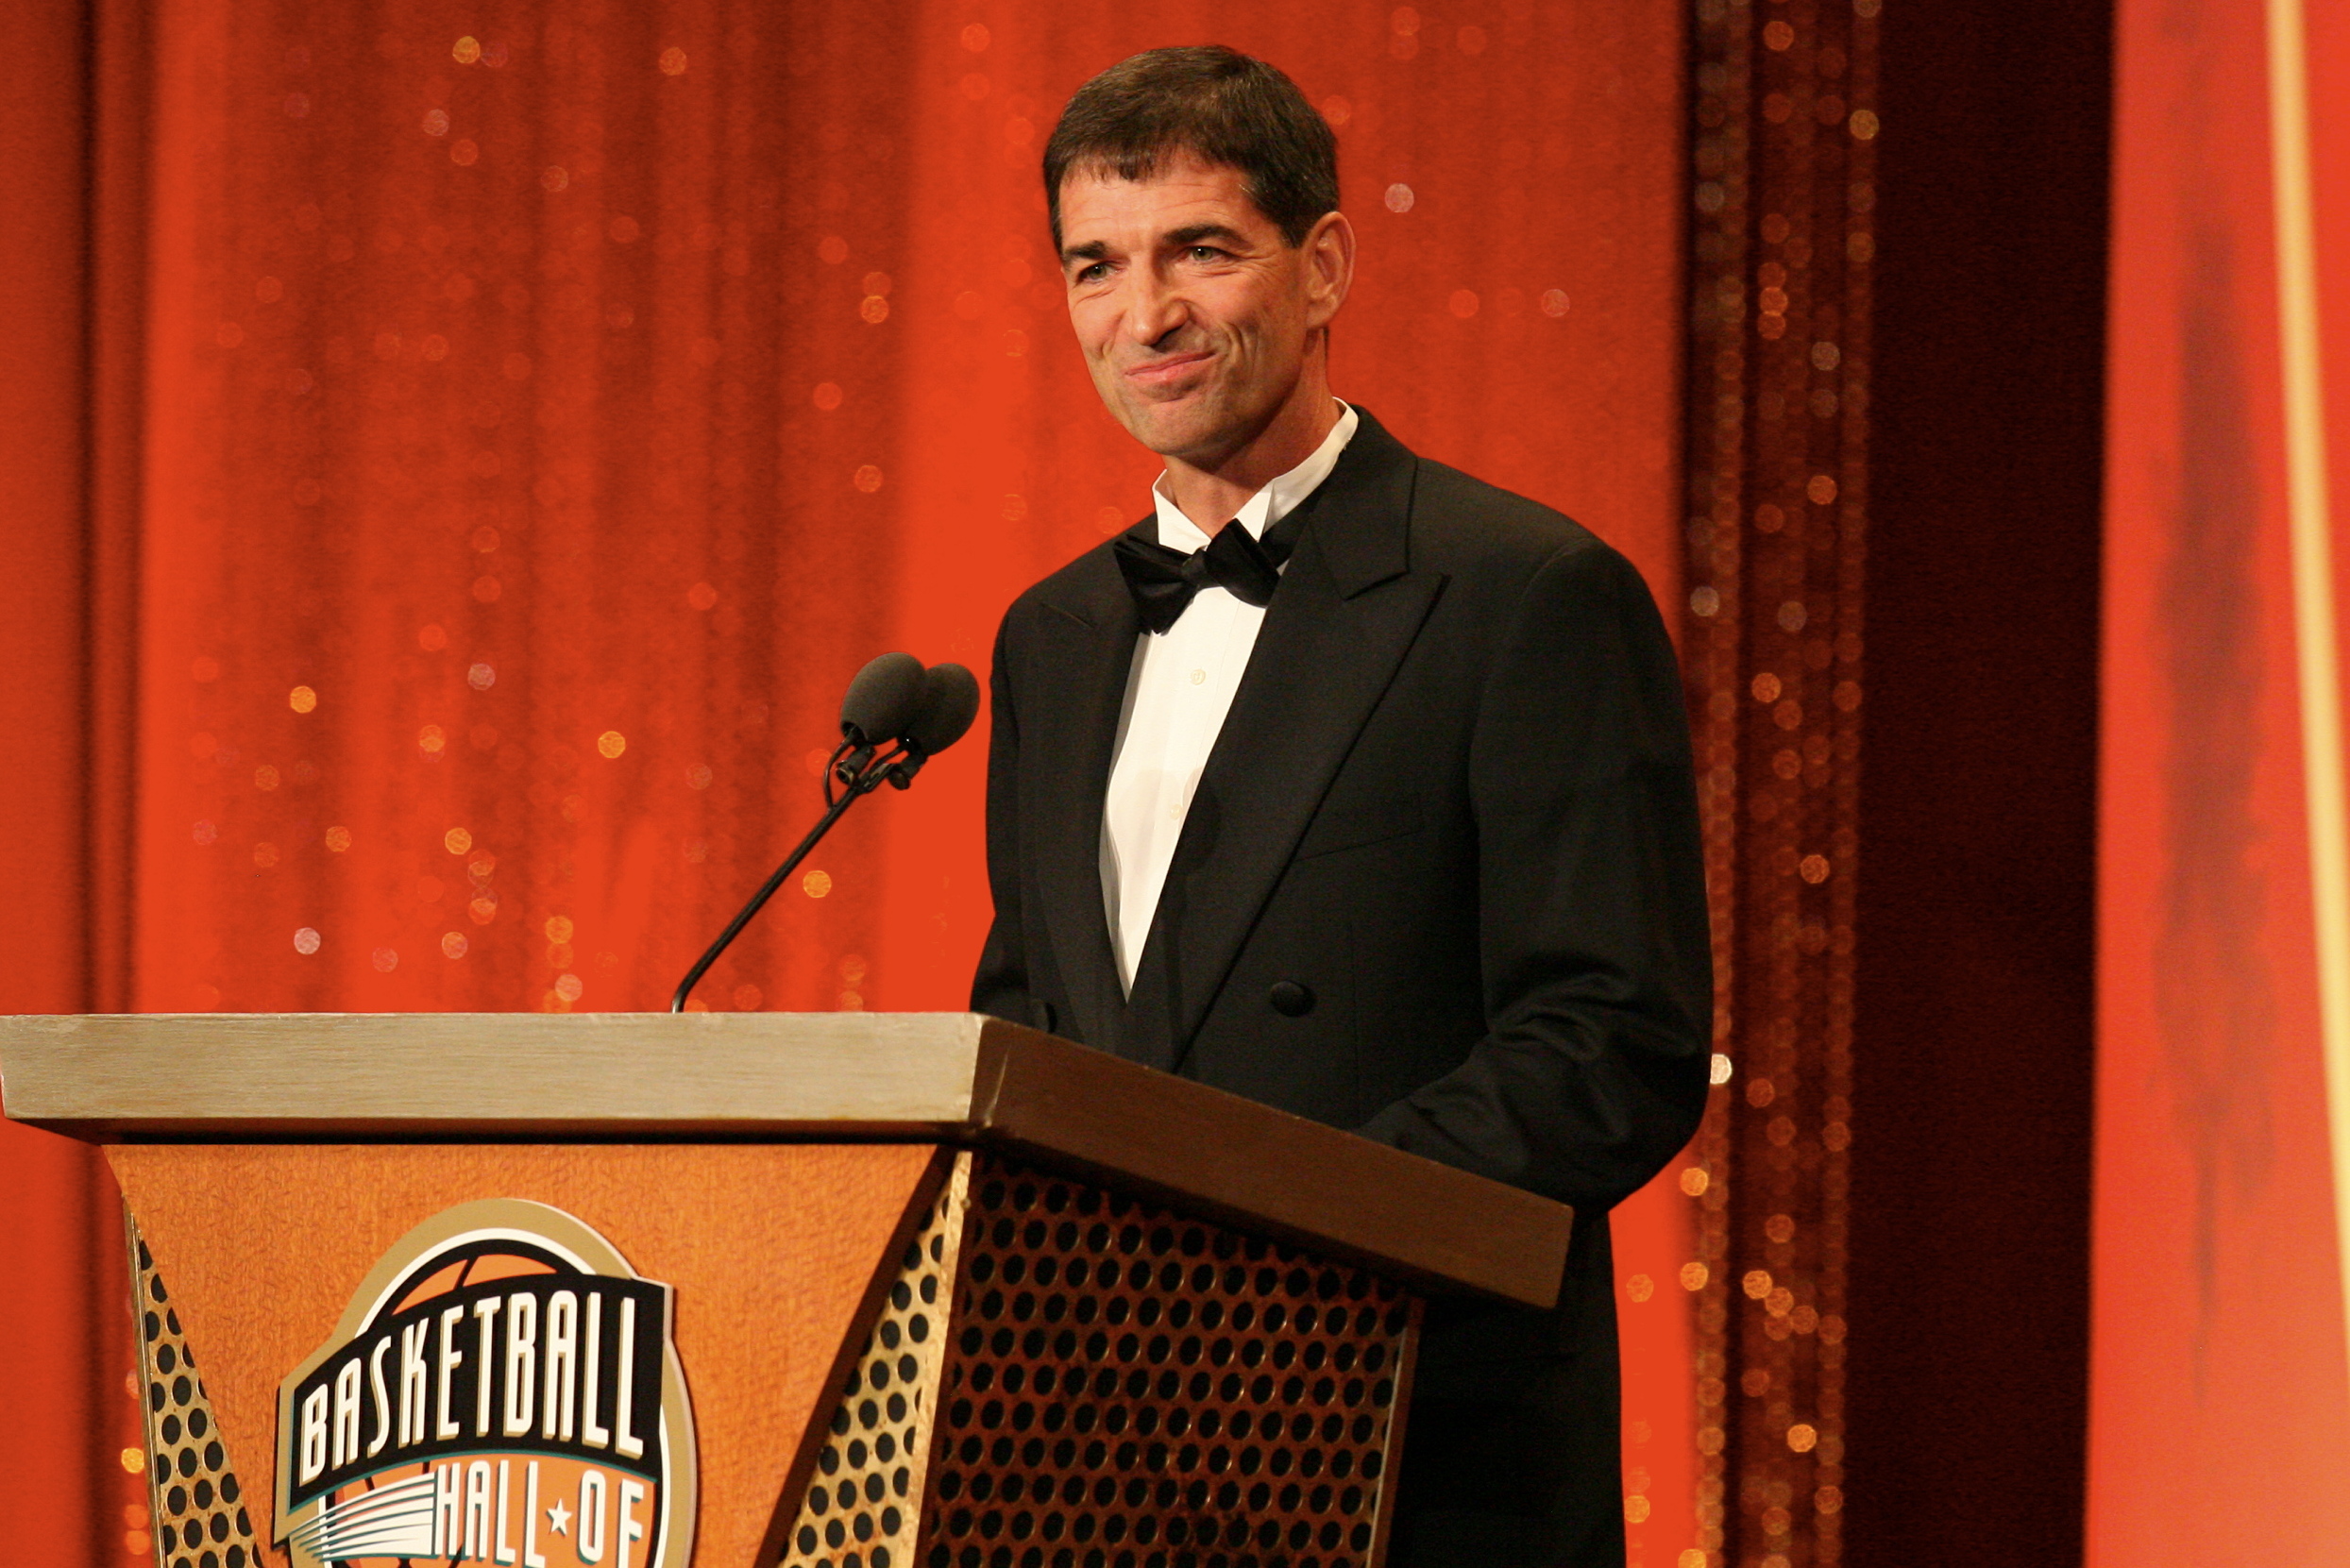 The Deseret News with John Stockton and Karl Malone at the Hall of Fame -  Deseret News